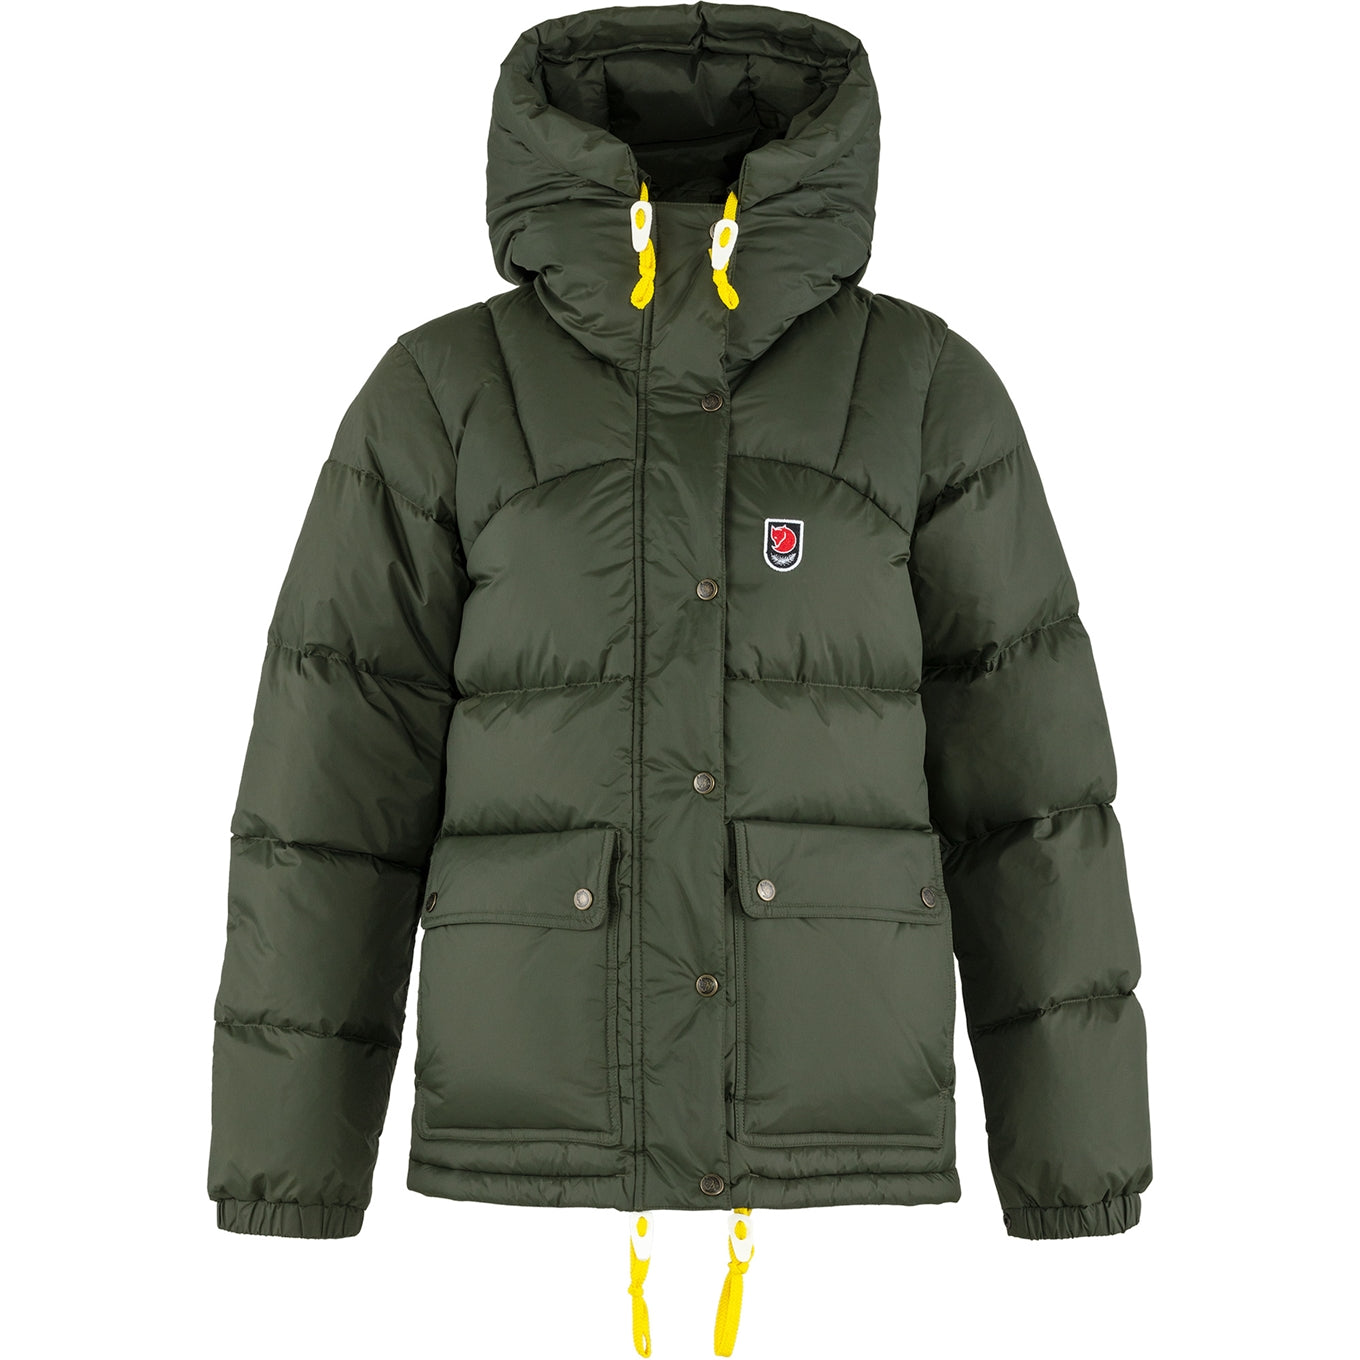 Expedition Down Light Jacket W